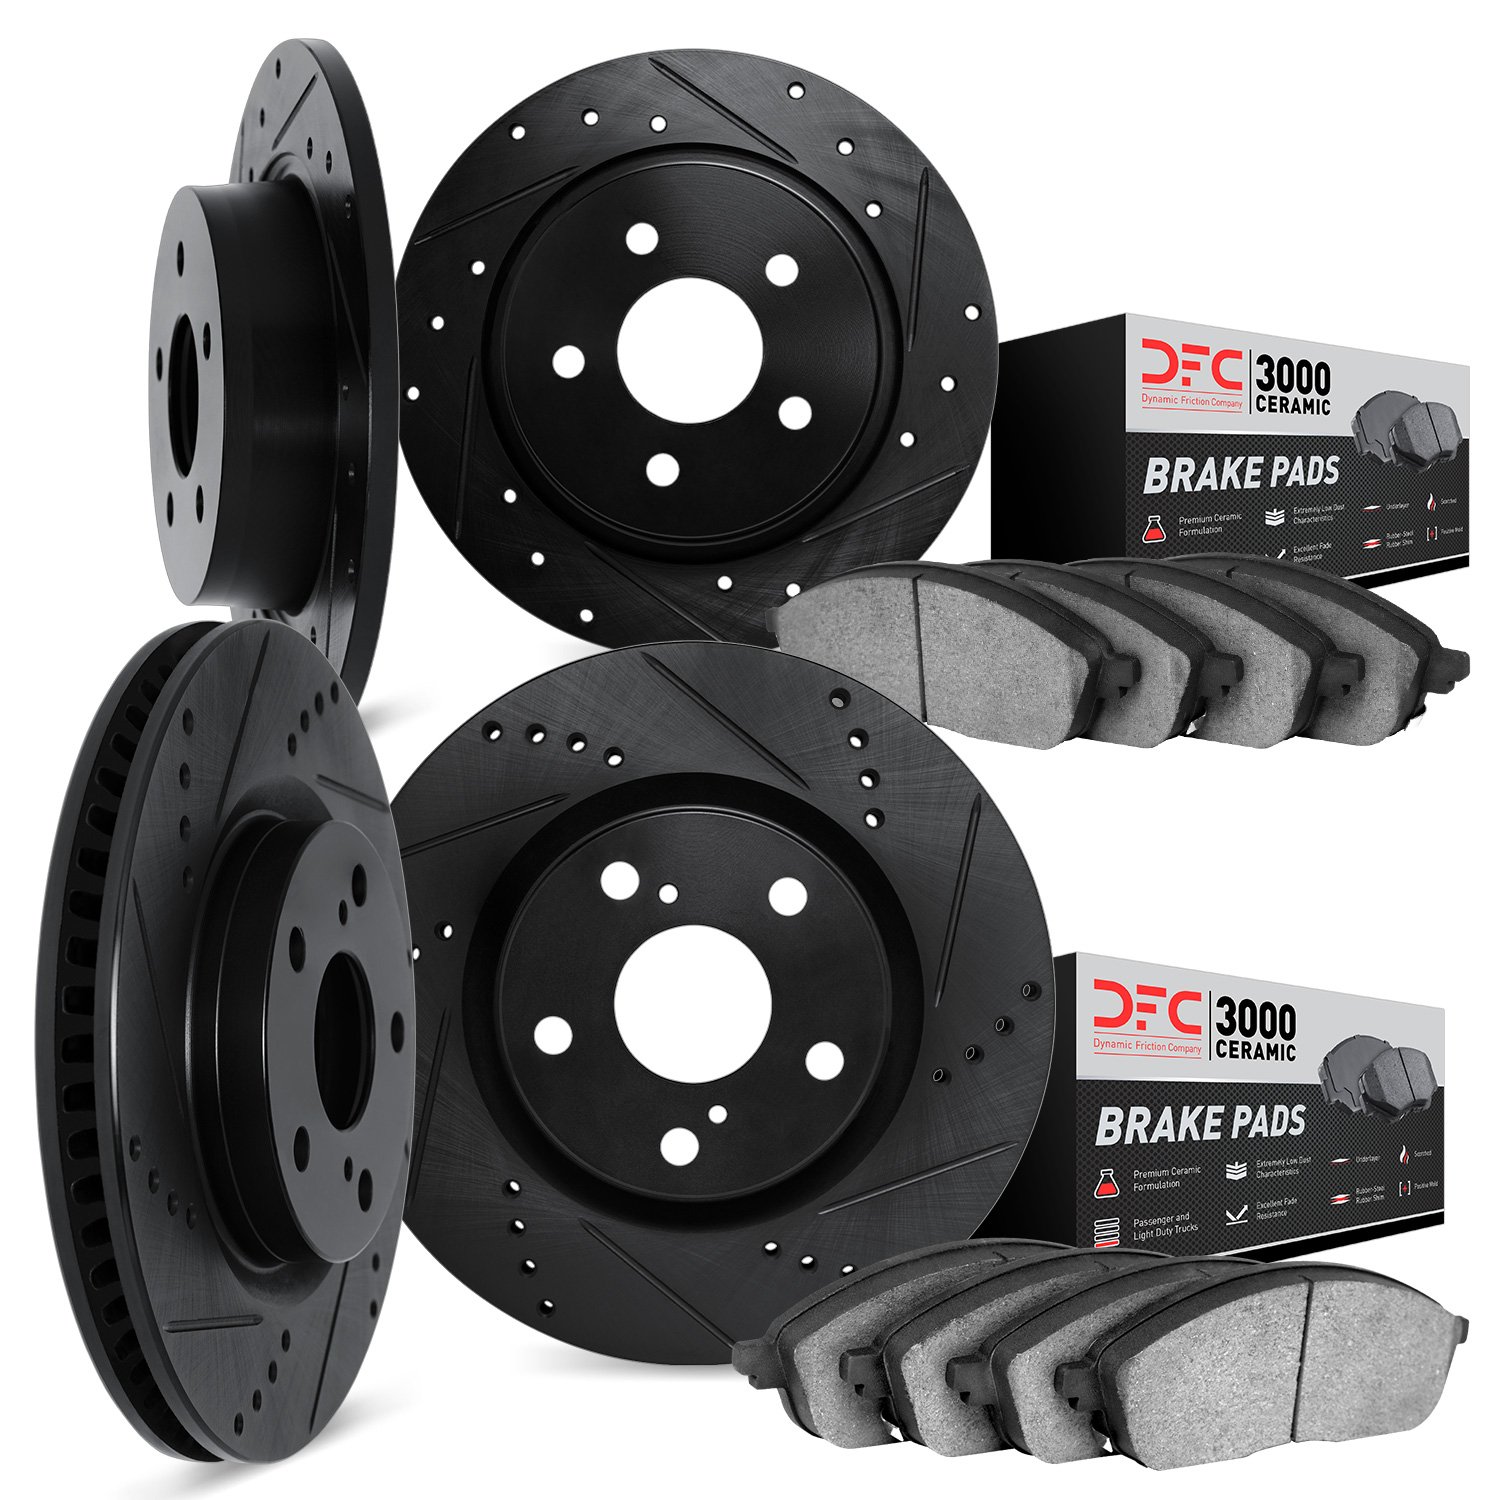 8304-31007 Drilled/Slotted Brake Rotors with 3000-Series Ceramic Brake Pads Kit [Black], 1987-1988 BMW, Position: Front and Rear